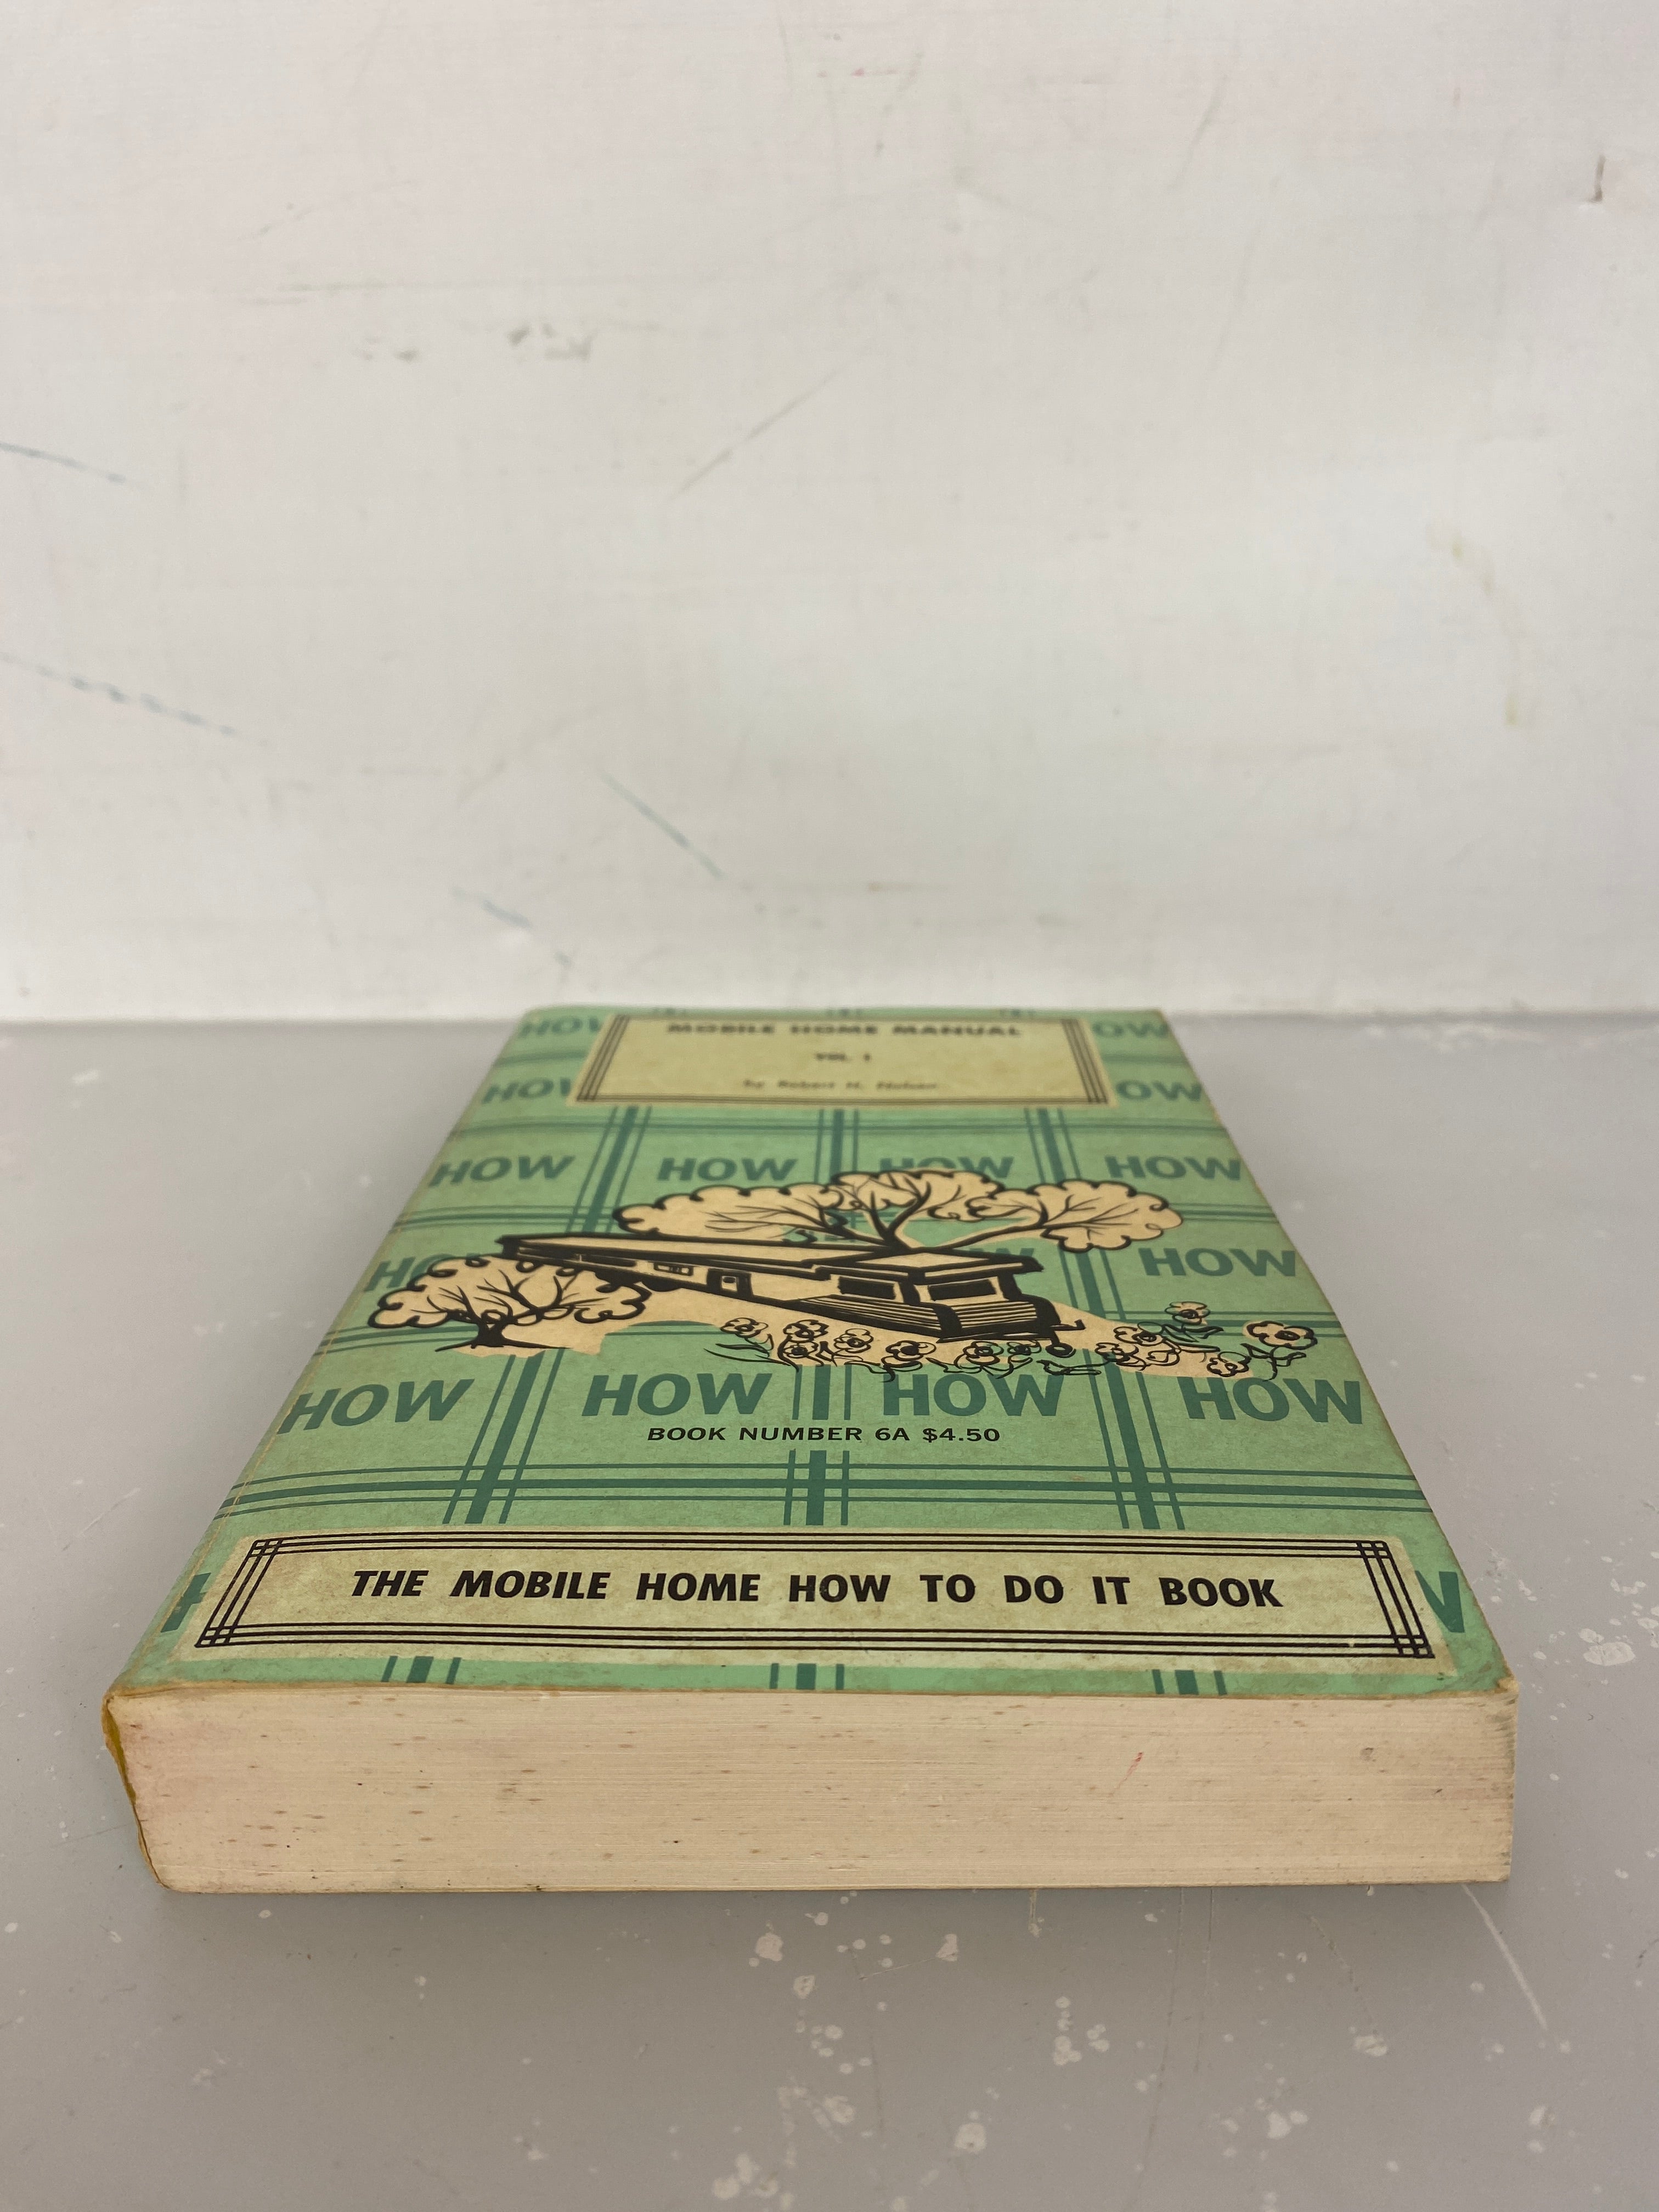 Vintage Mobile Home Manual Volume I by Robert Nulsen The Mobile Home How to Do It Book 1972 SC